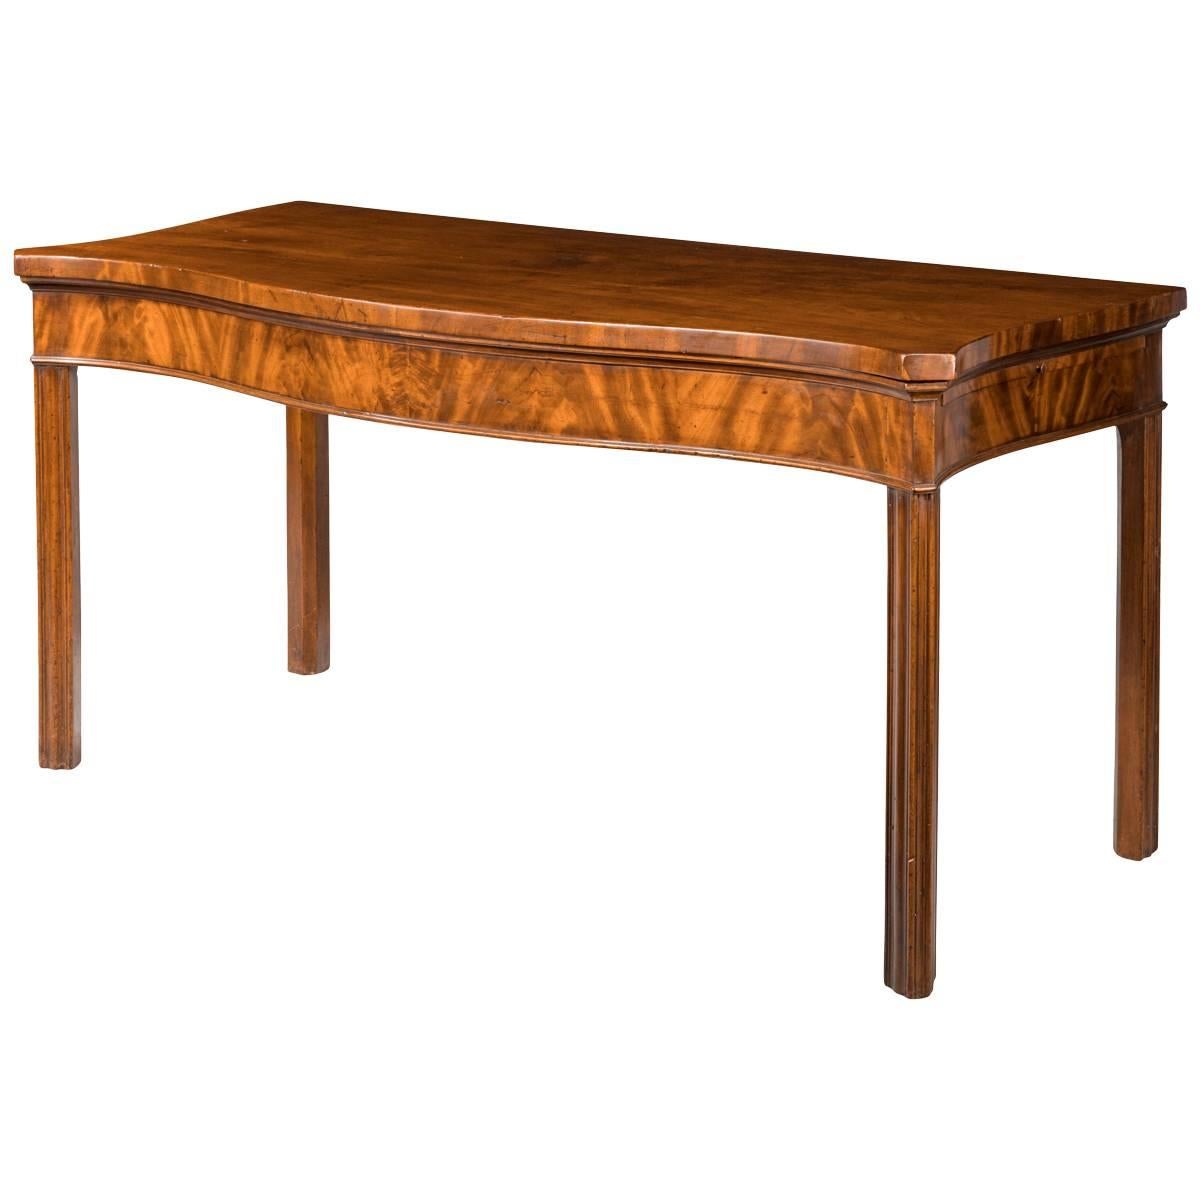 George III Period Mahogany Serpentine Serving Table For Sale